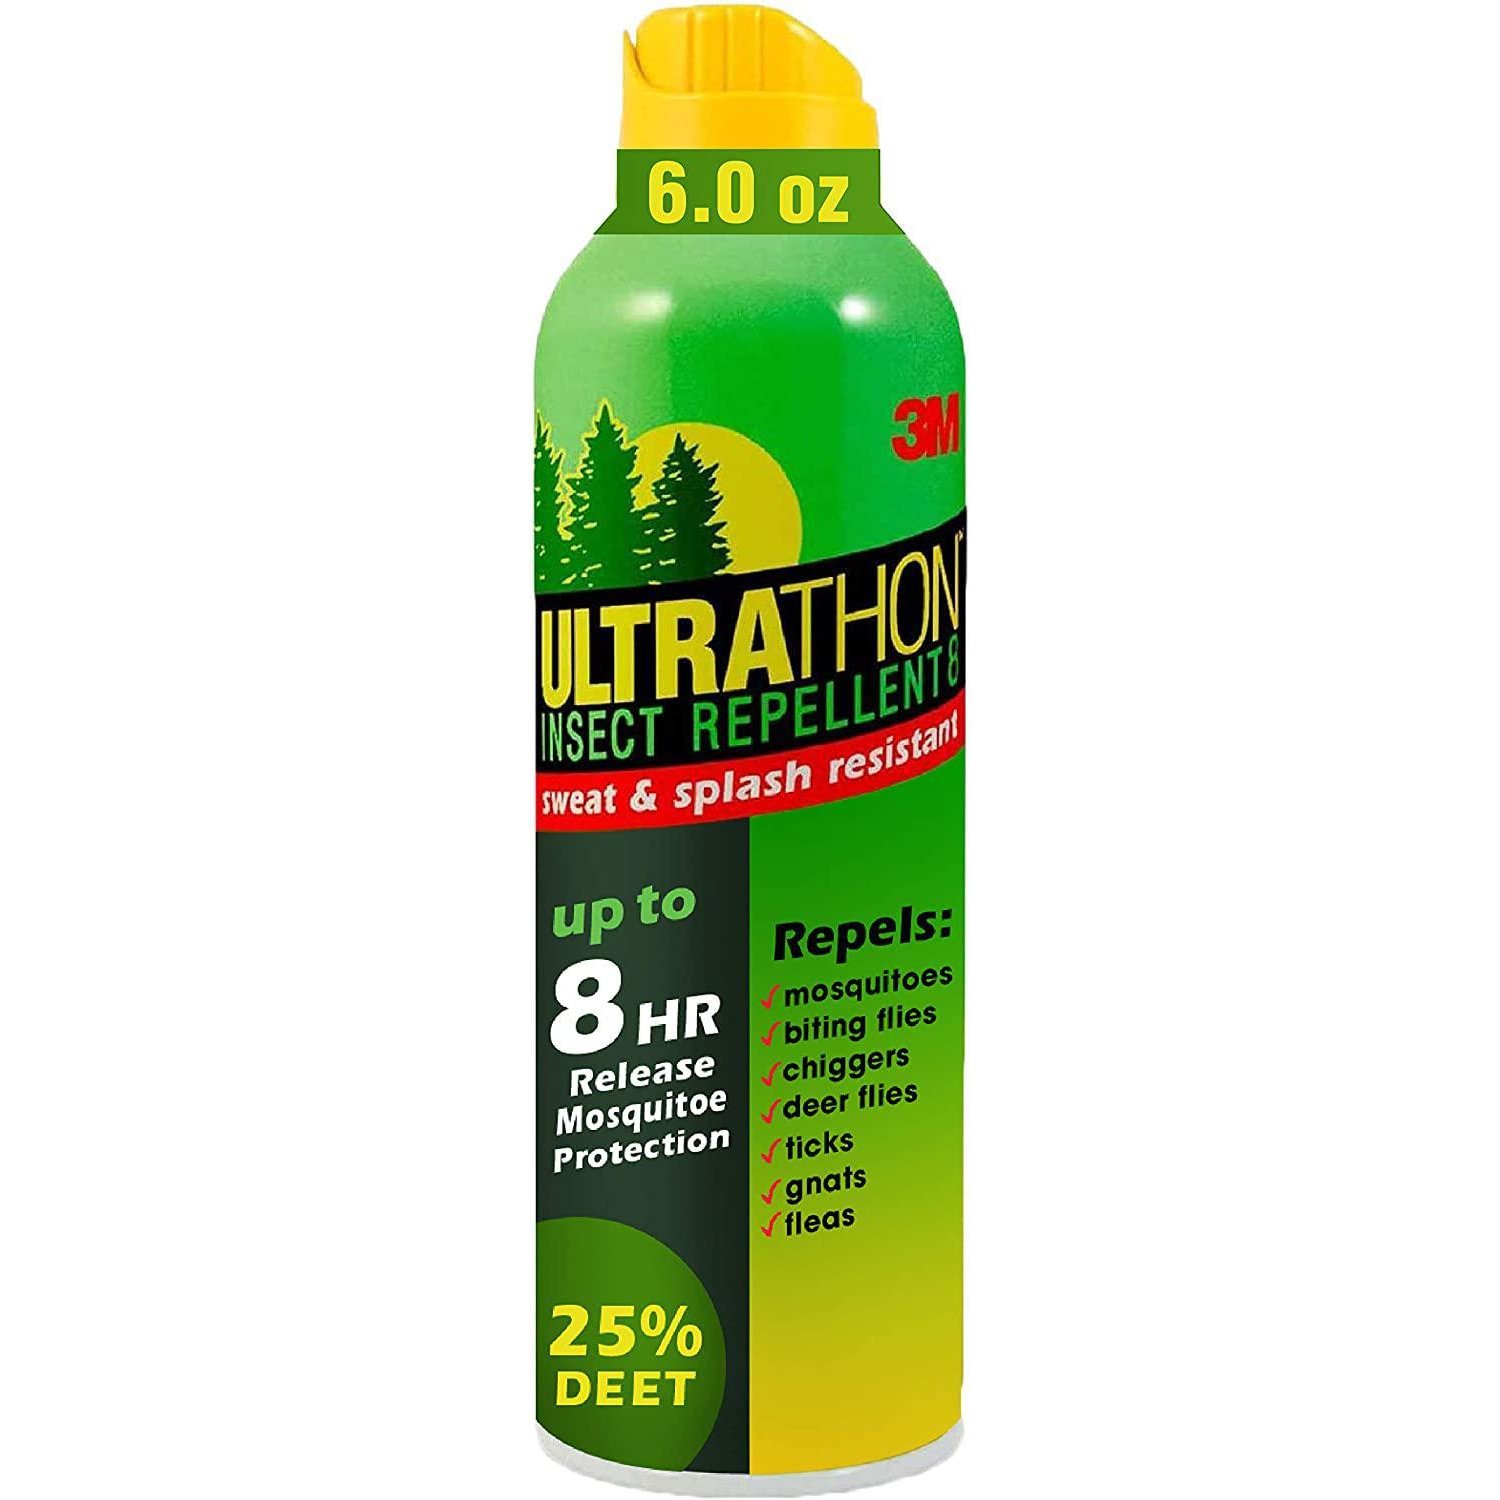 3M Ultrathon Spray Insect Repellent